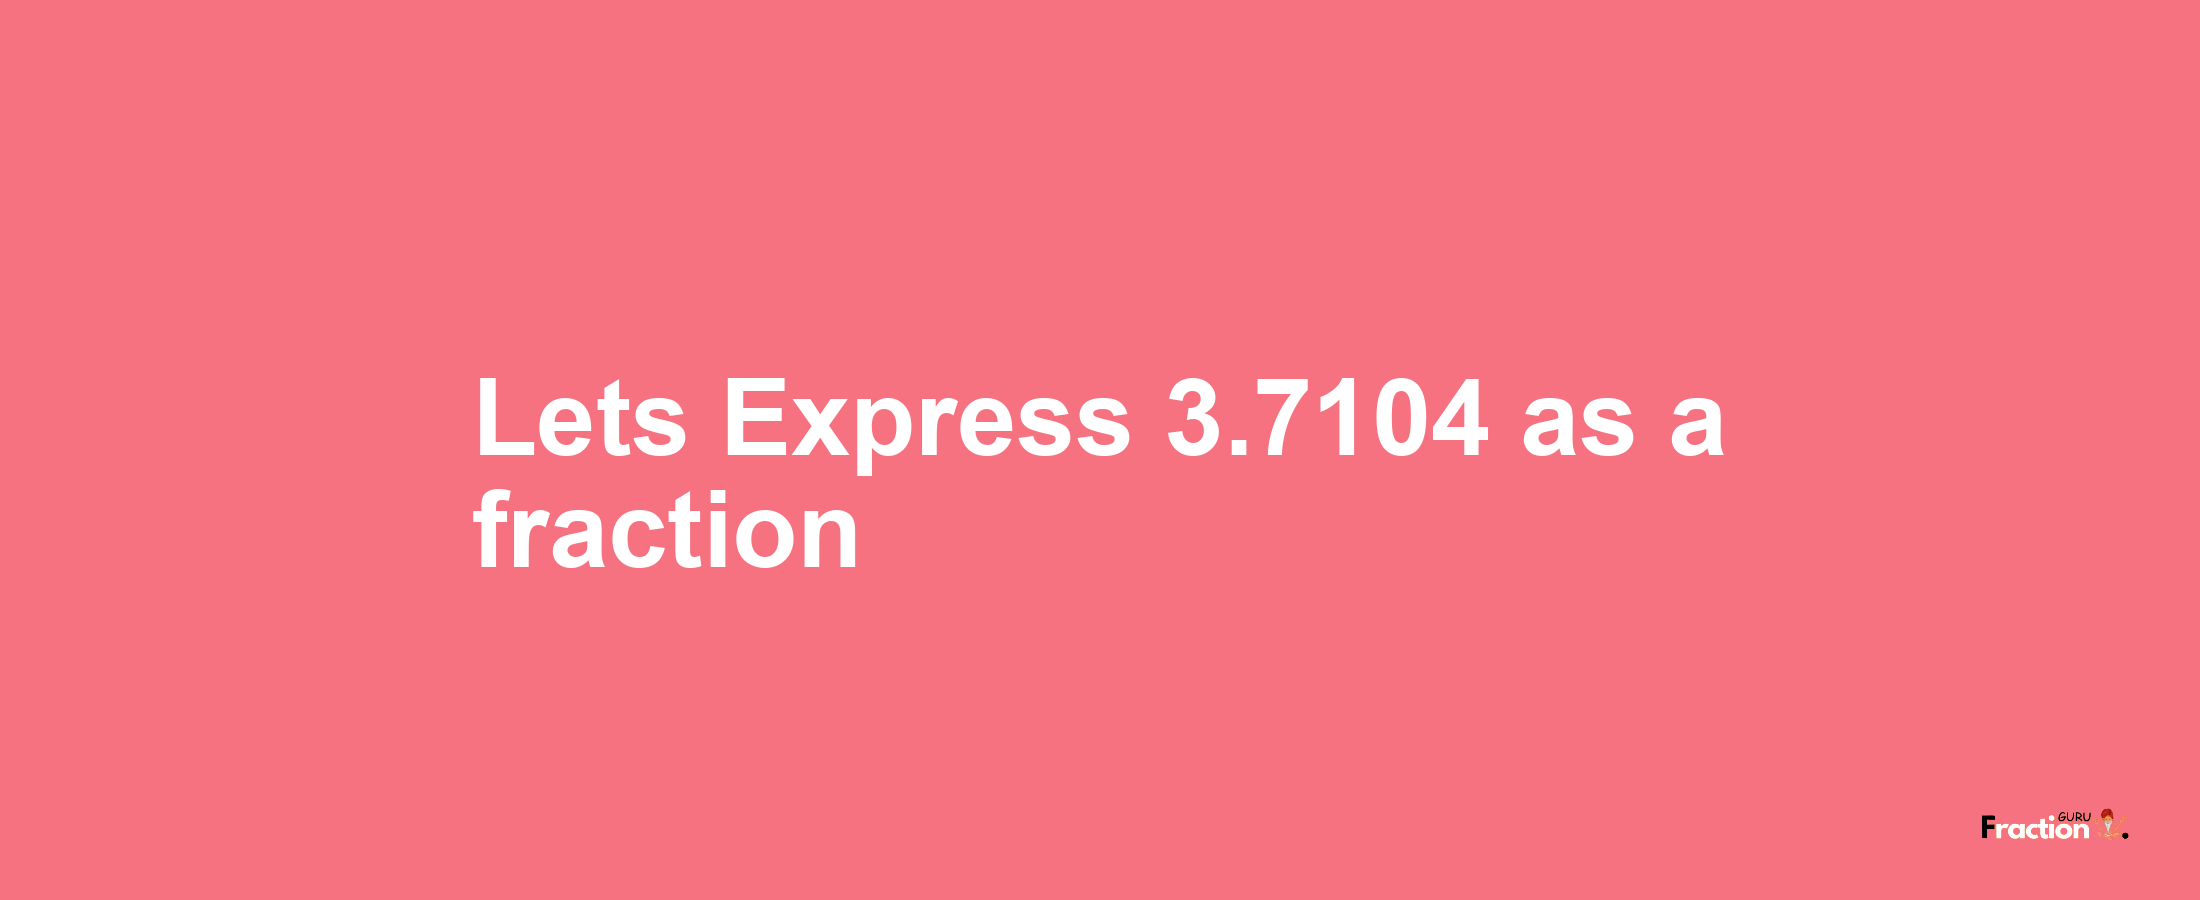 Lets Express 3.7104 as afraction